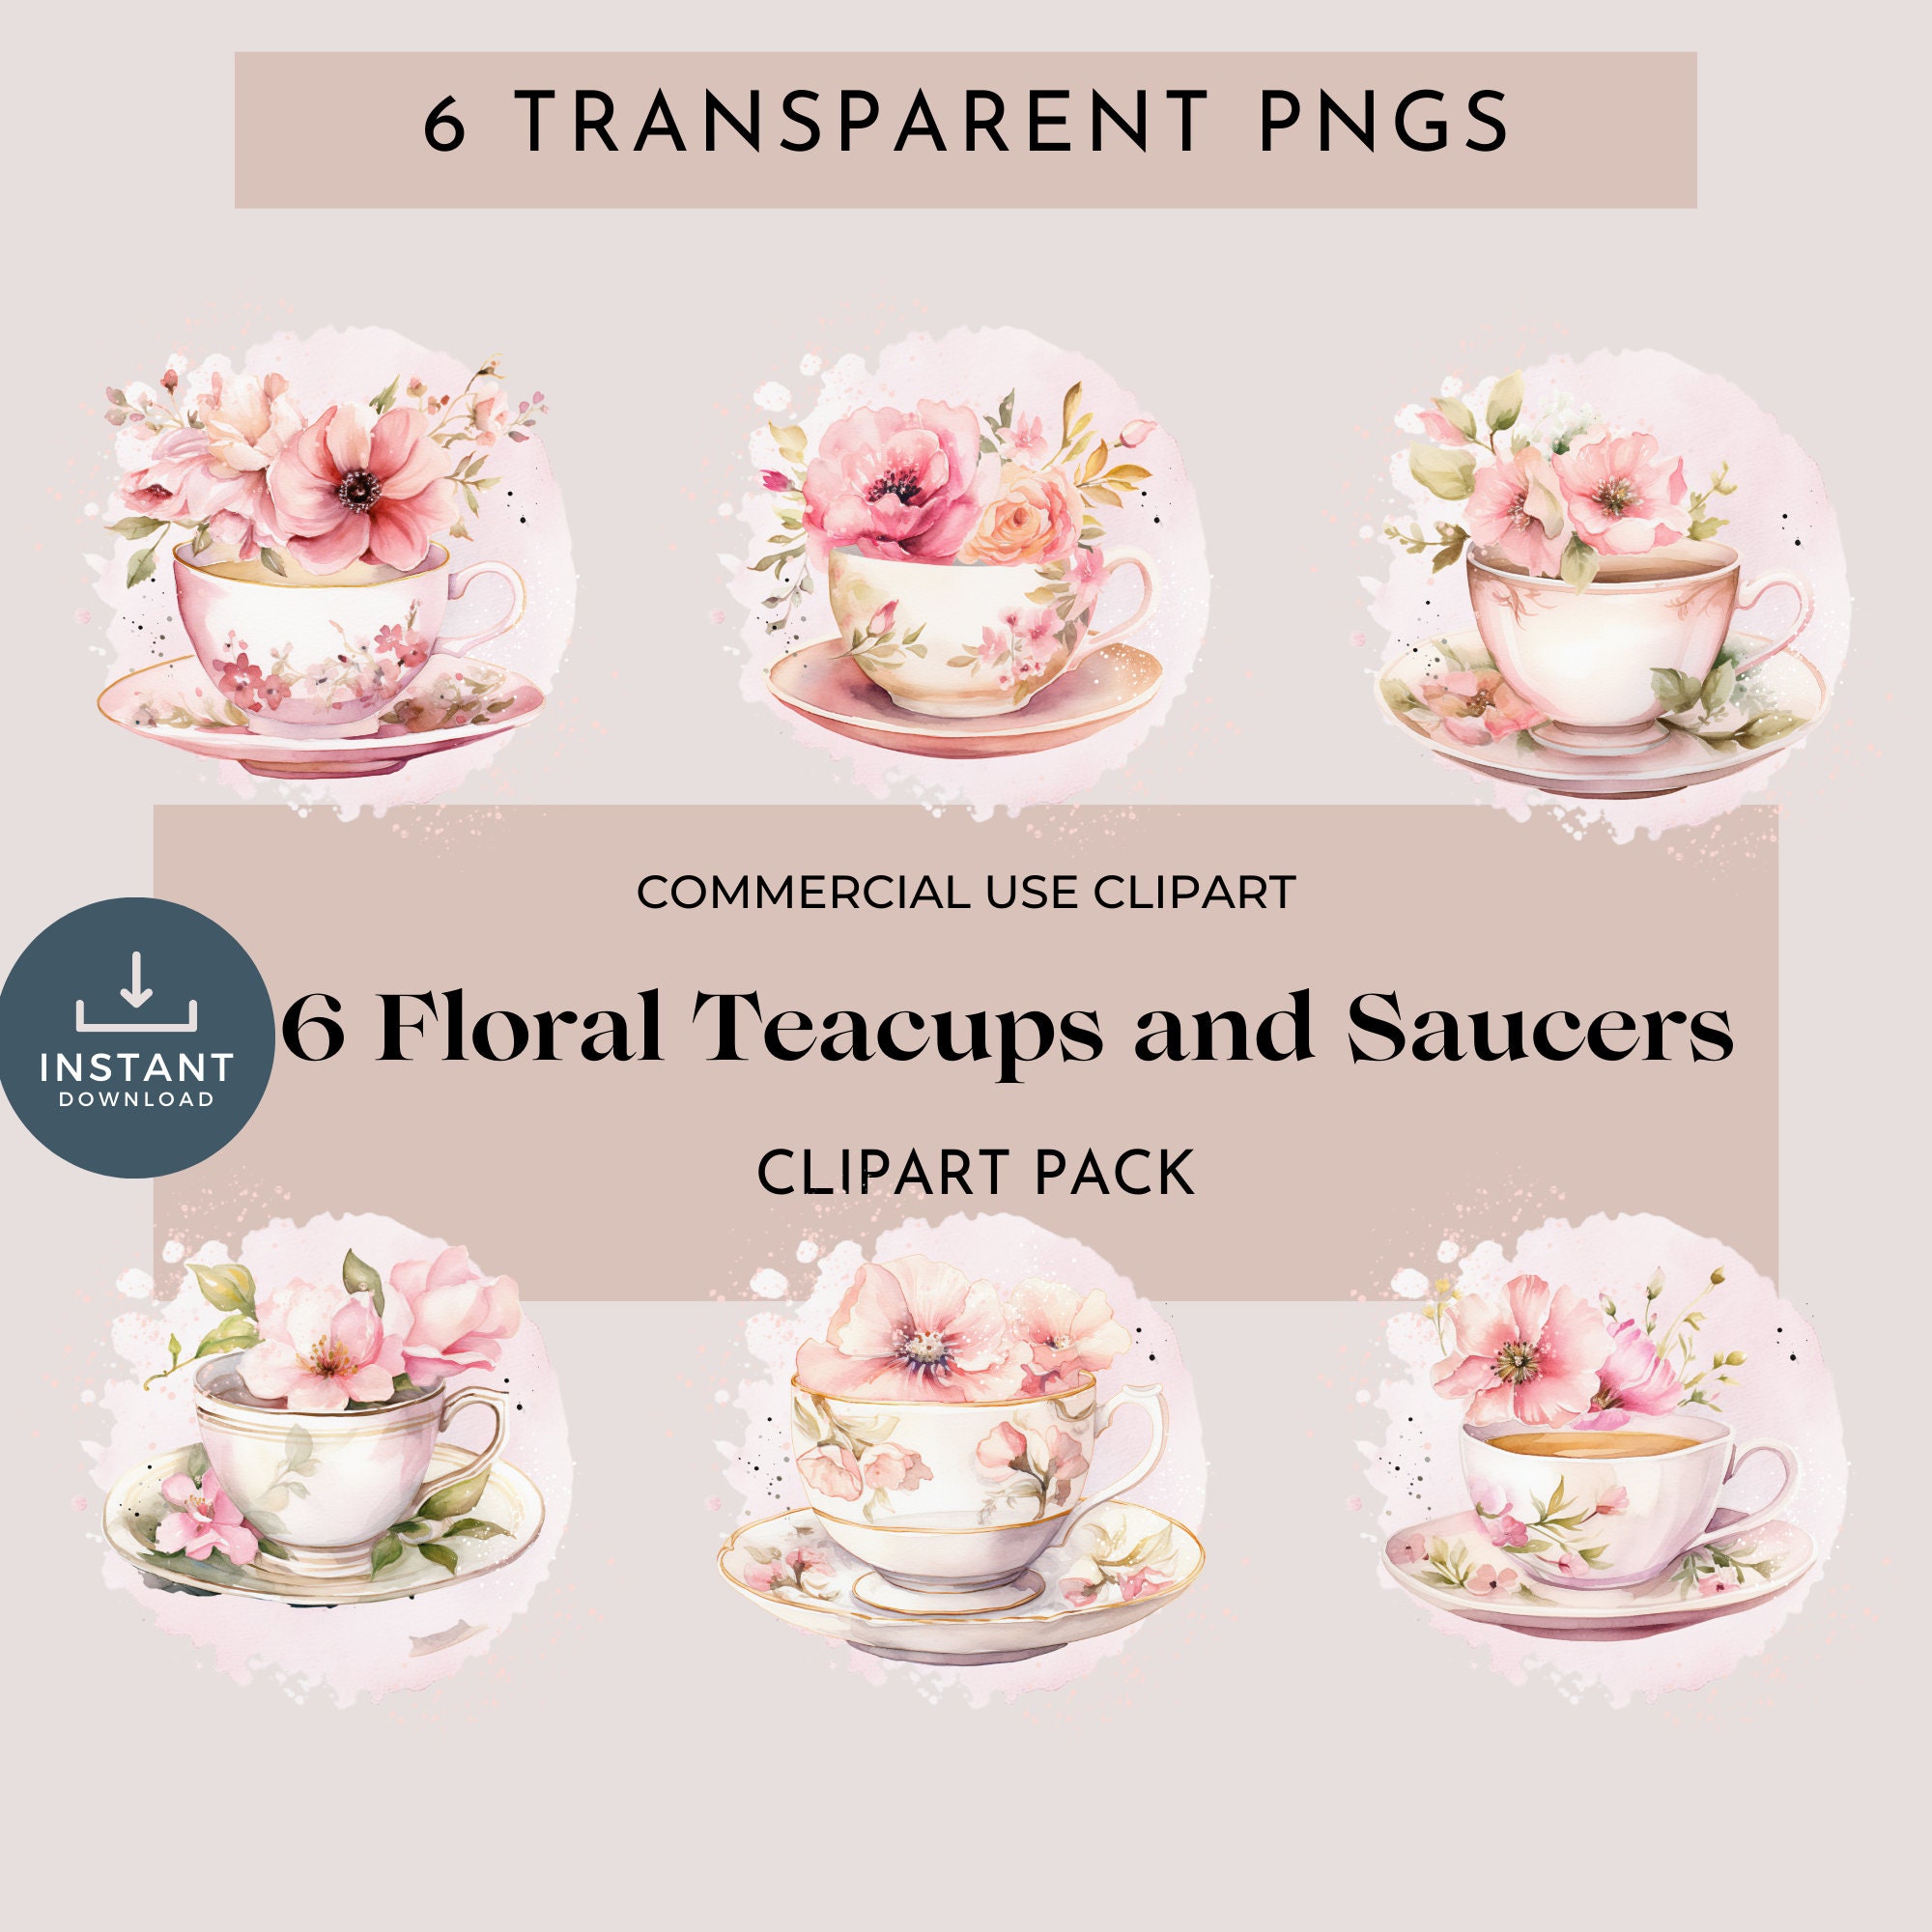 Tea Cup Clipart Set Vintage Tea and Coffee Cups Teacup Flat Images  Commercial Use Allowed INSTANT DOWNLOAD 34 .PNG Images 